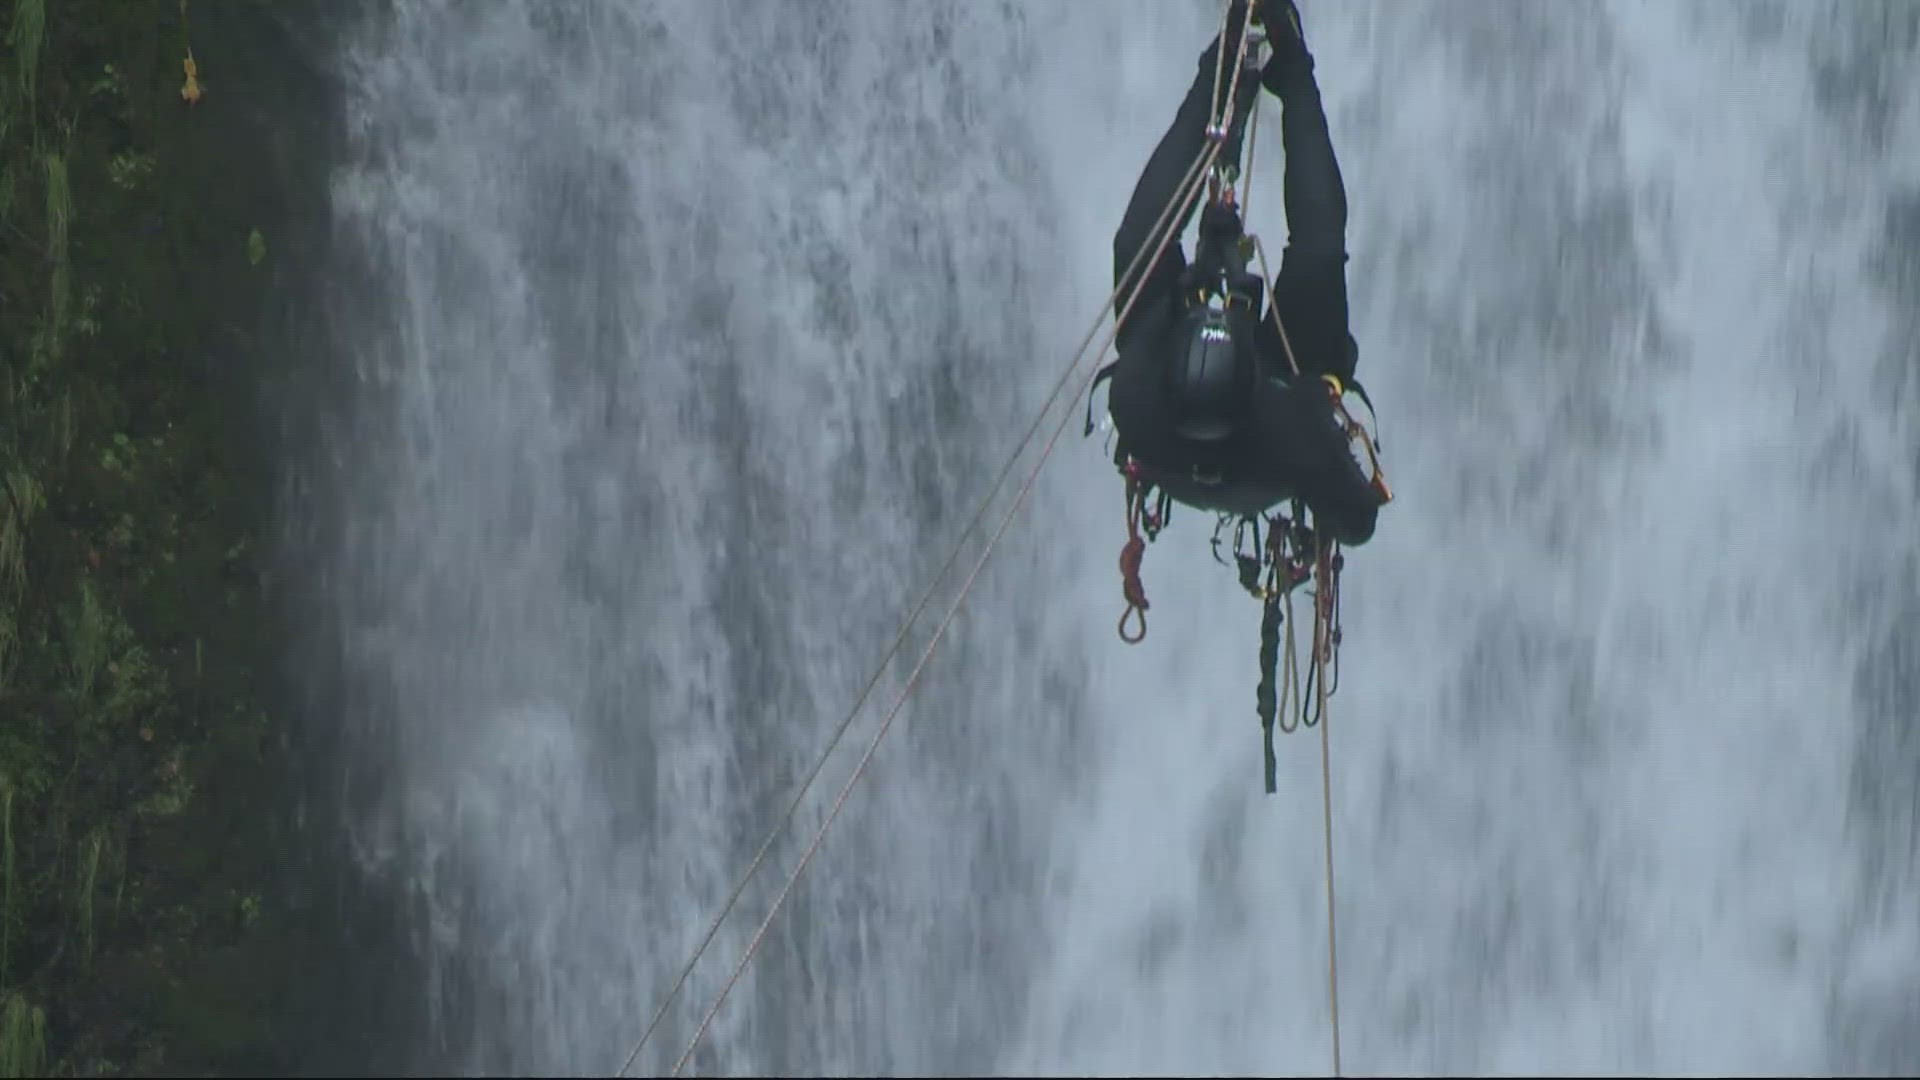 While practicing rope techniques on Oregon's tallest waterfall, an all-volunteer team of search and rescue crews also helped pick up trash.